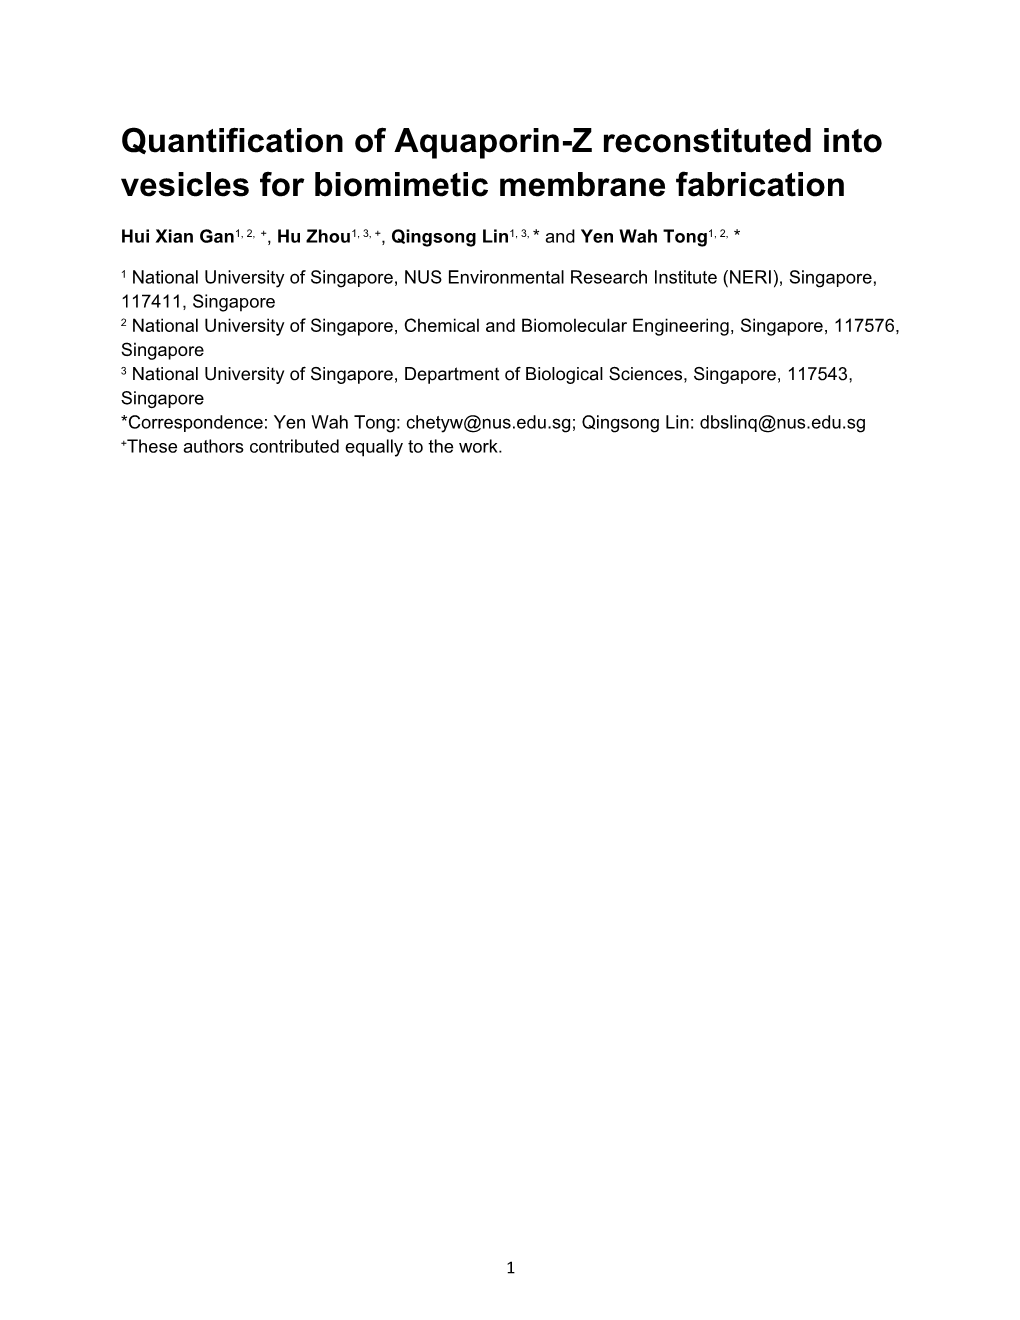 Quantification of Aquaporin-Z Reconstituted Into Vesicles for Biomimetic Membrane Fabrication